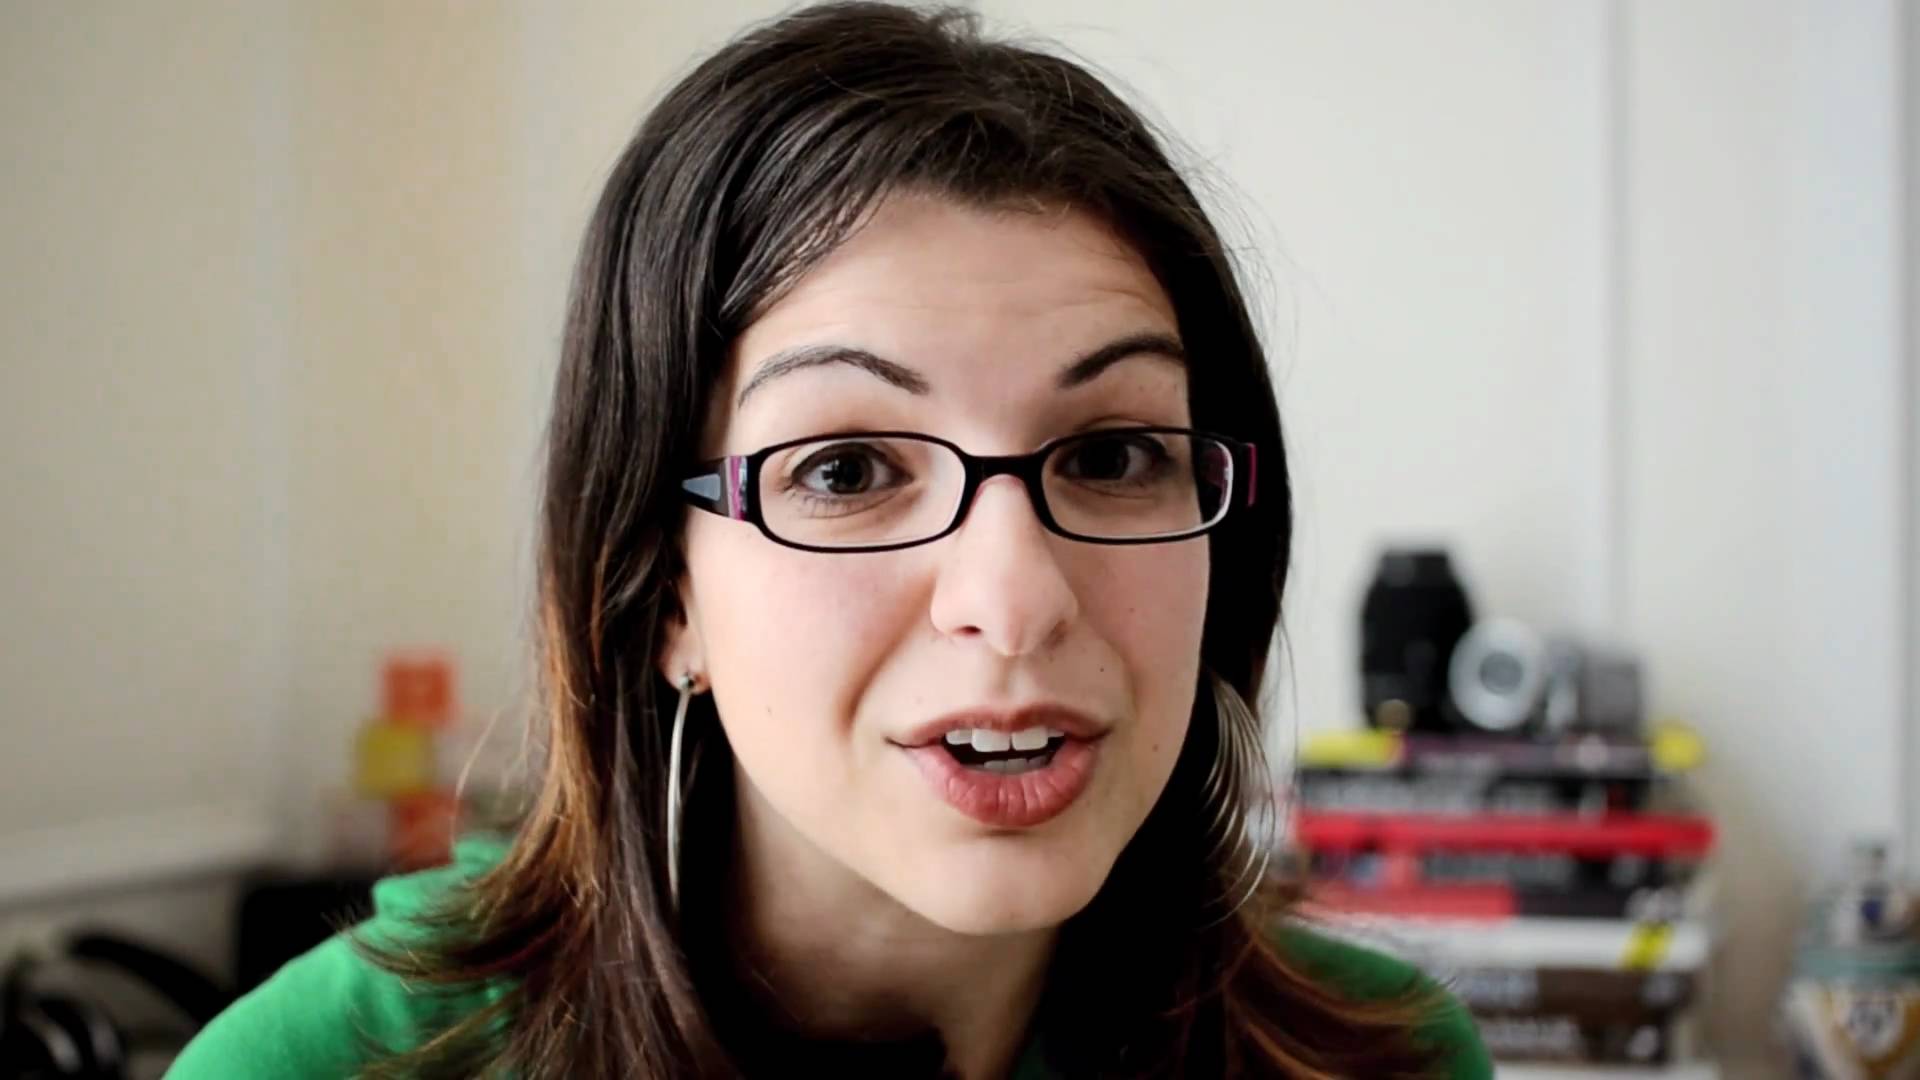 Anita Sarkeesian hosts a channel called "Feminist Frequency". The problem people have with her is her vids contain gross misinformation. The biggest being her post on video games, where she includes a section on "Hitman: Absolution". She argues that games like Hitman cater to sexless nerds by allowing them to beat and murder prostitutes and gain points for hiding or disposing of their bodies. Except Hitman's system deducts points for your killing of innocent people. Sarkeesian also shuts off the comment and rating system for her uploads and began a kickstarter campaign in which she raked in over $160,000 with no word on why she wanted the money or what she plans to do with it.